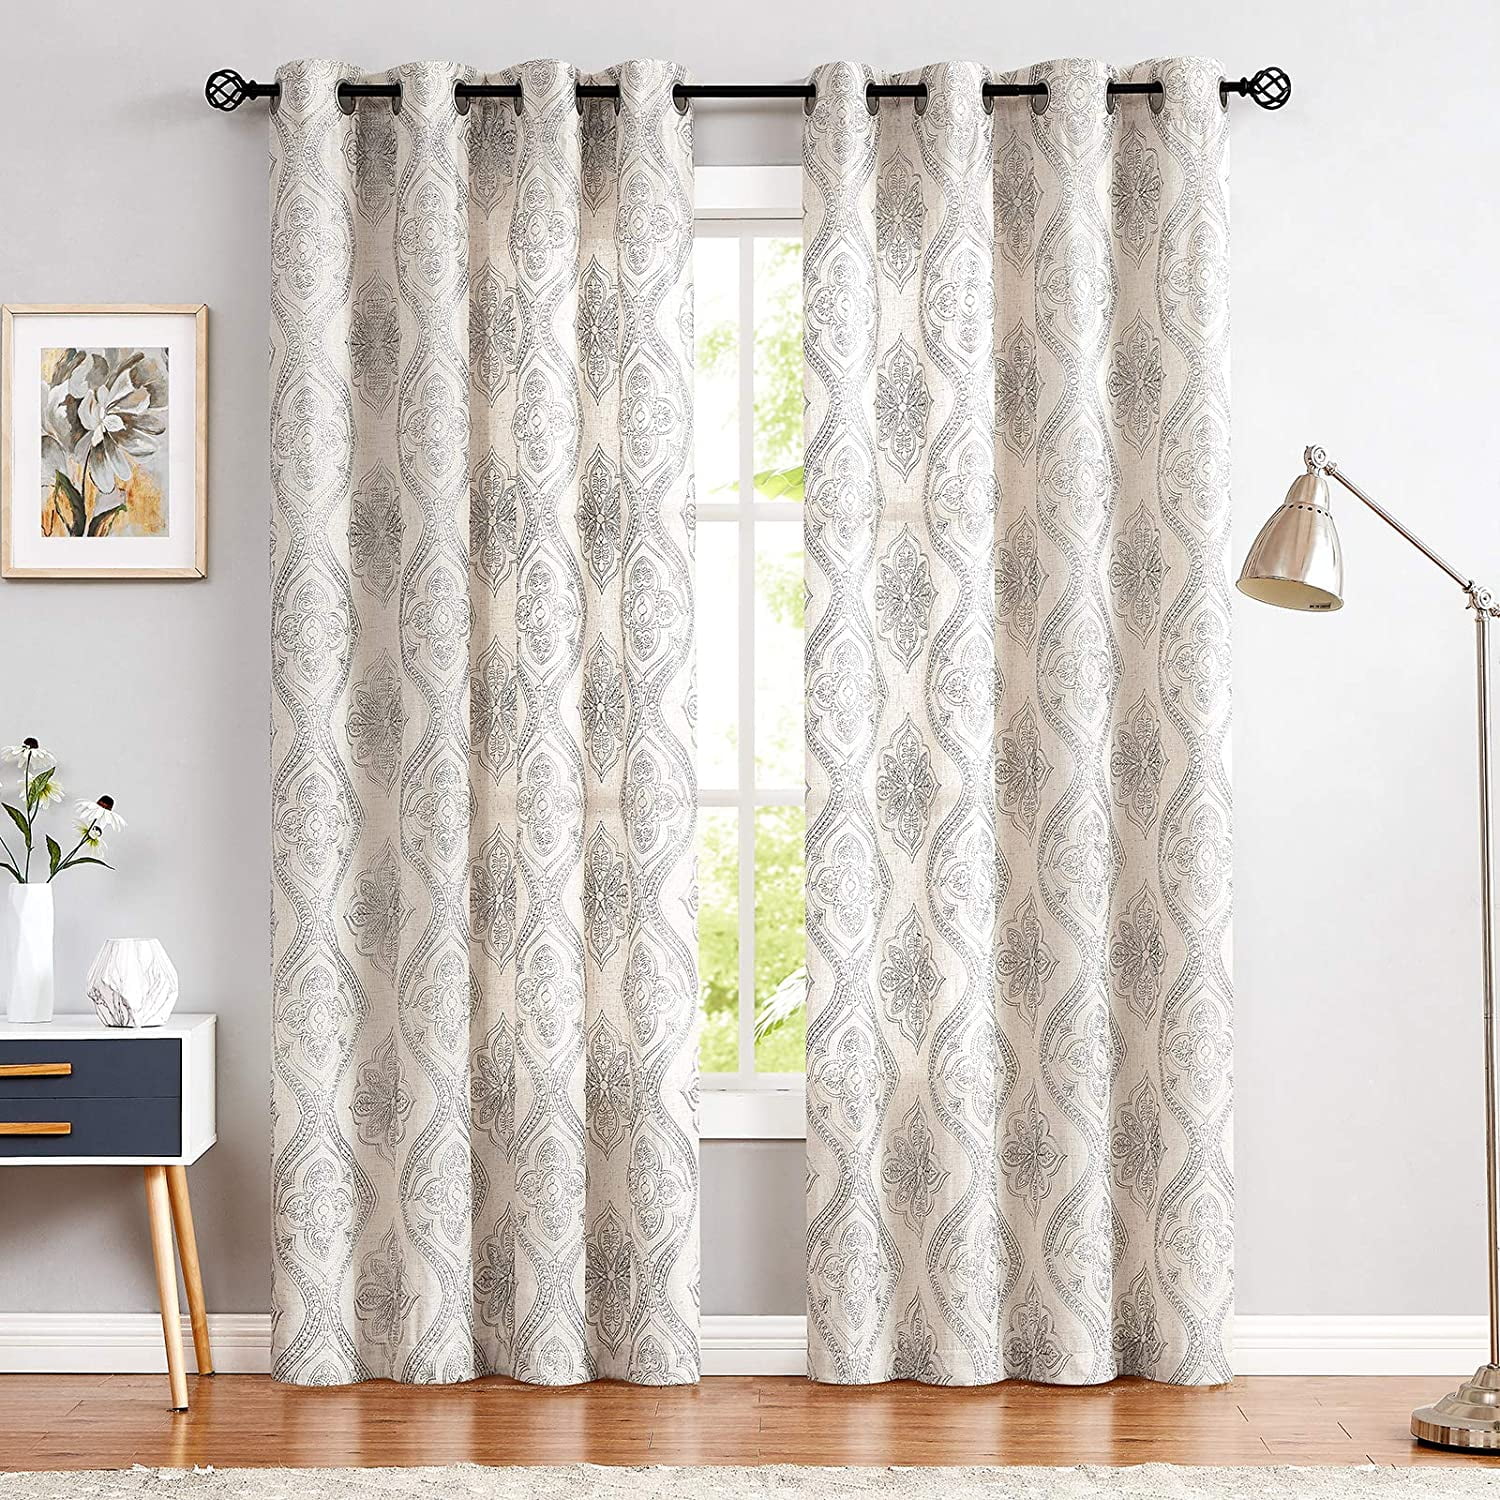 Linen Textured Curtains Living Room mbroidered Design Window Curtains 2 Panels 